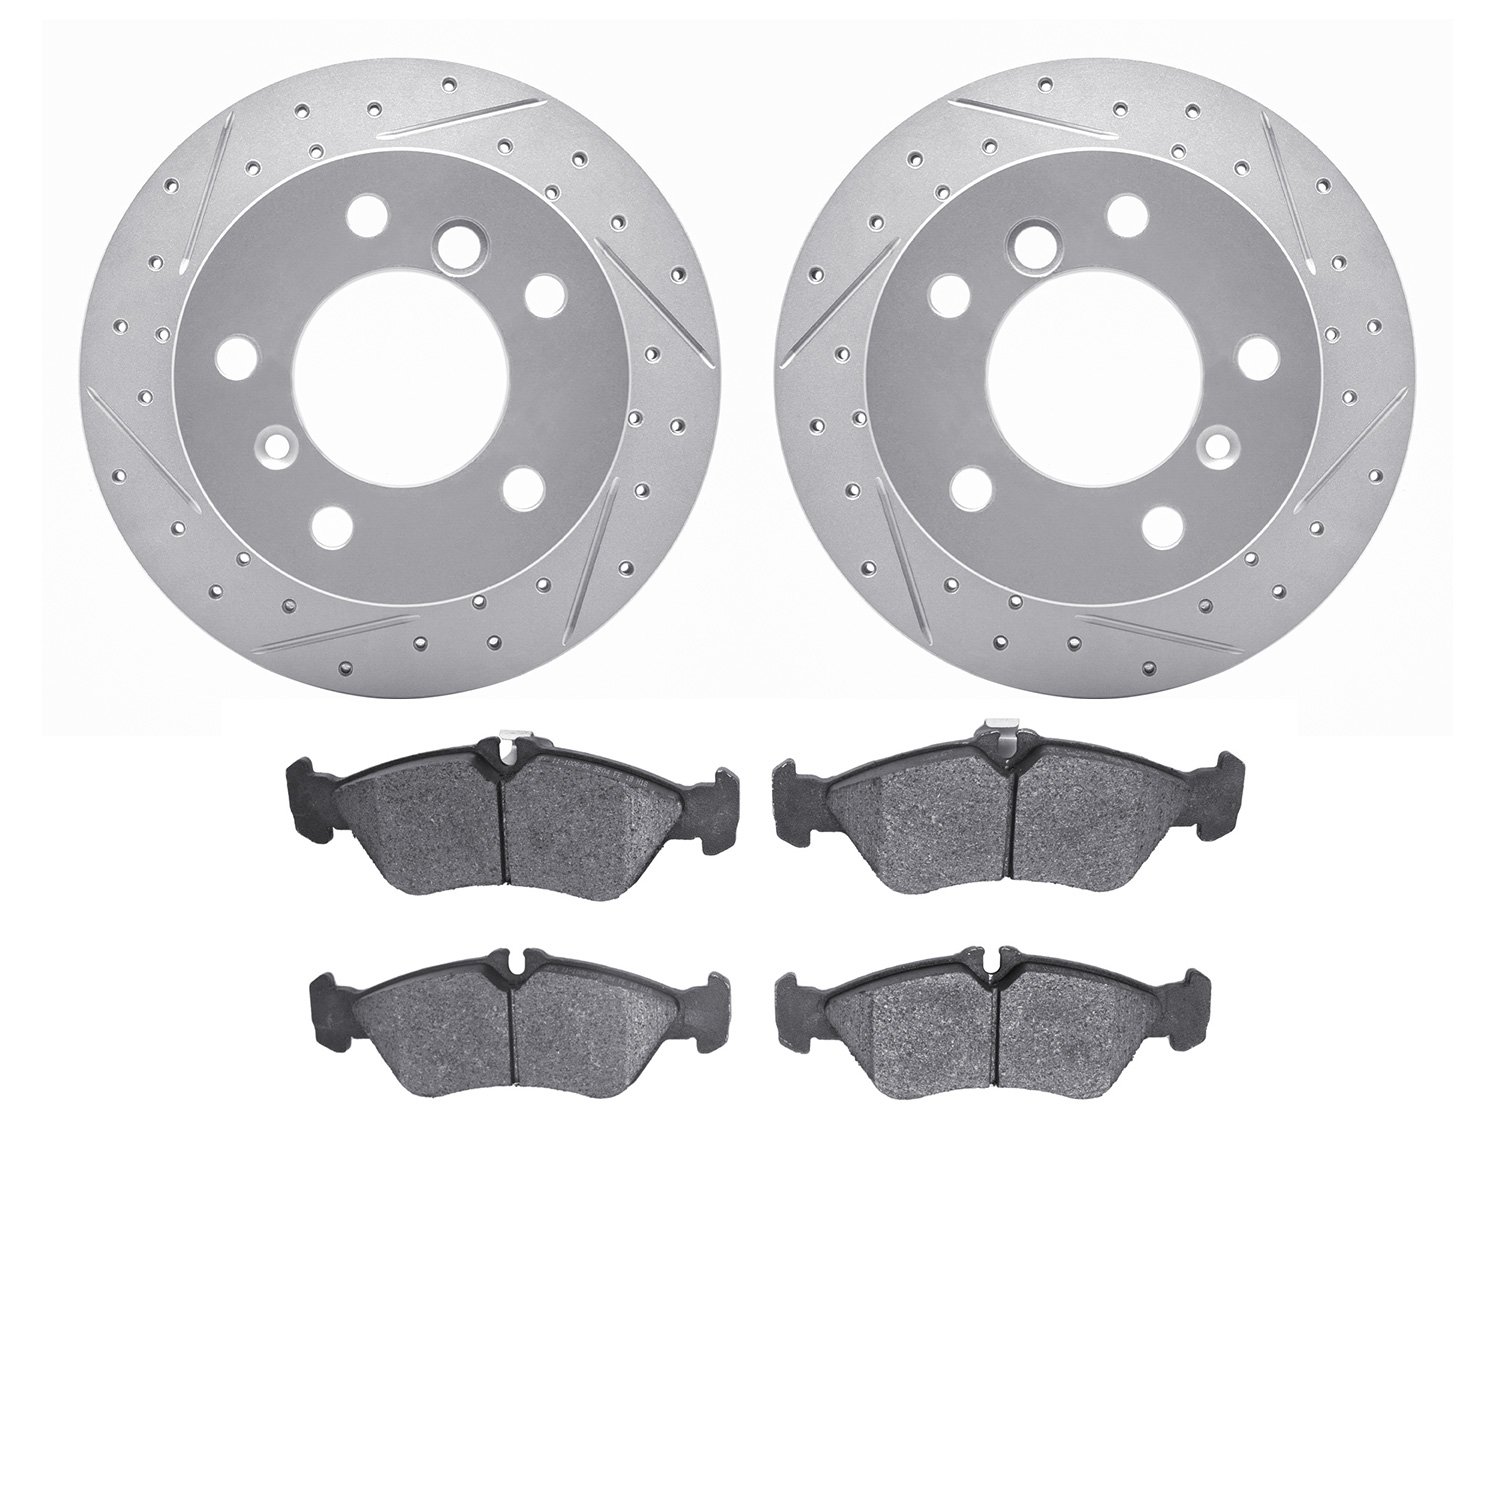 2202-40019 Geoperformance Drilled/Slotted Rotors w/Heavy-Duty Pads Kit, 2002-2006 Multiple Makes/Models, Position: Rear